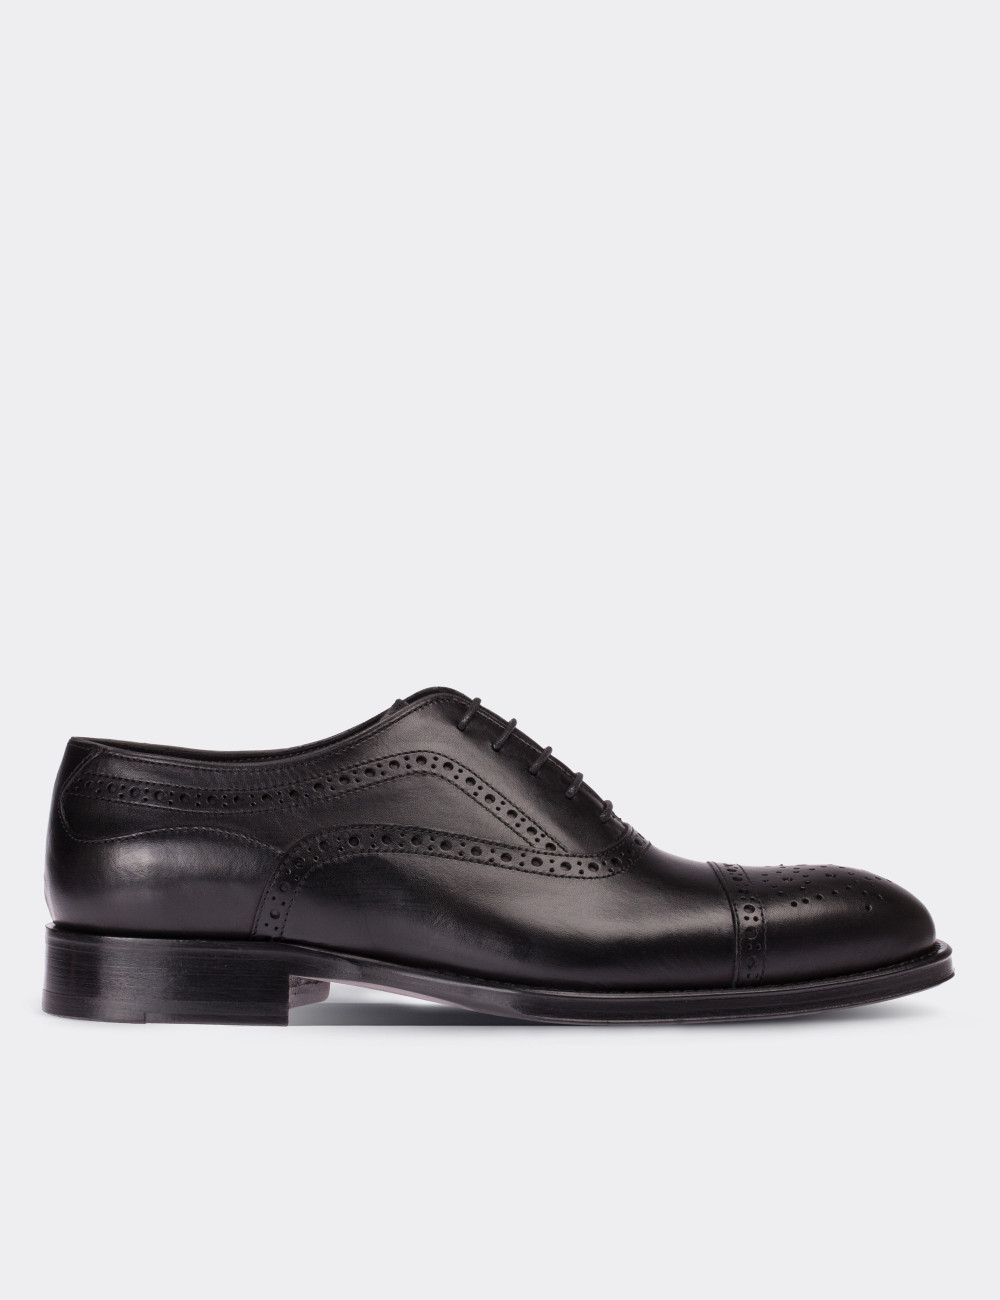 Black  Leather Classic Shoes - 01595MSYHK01